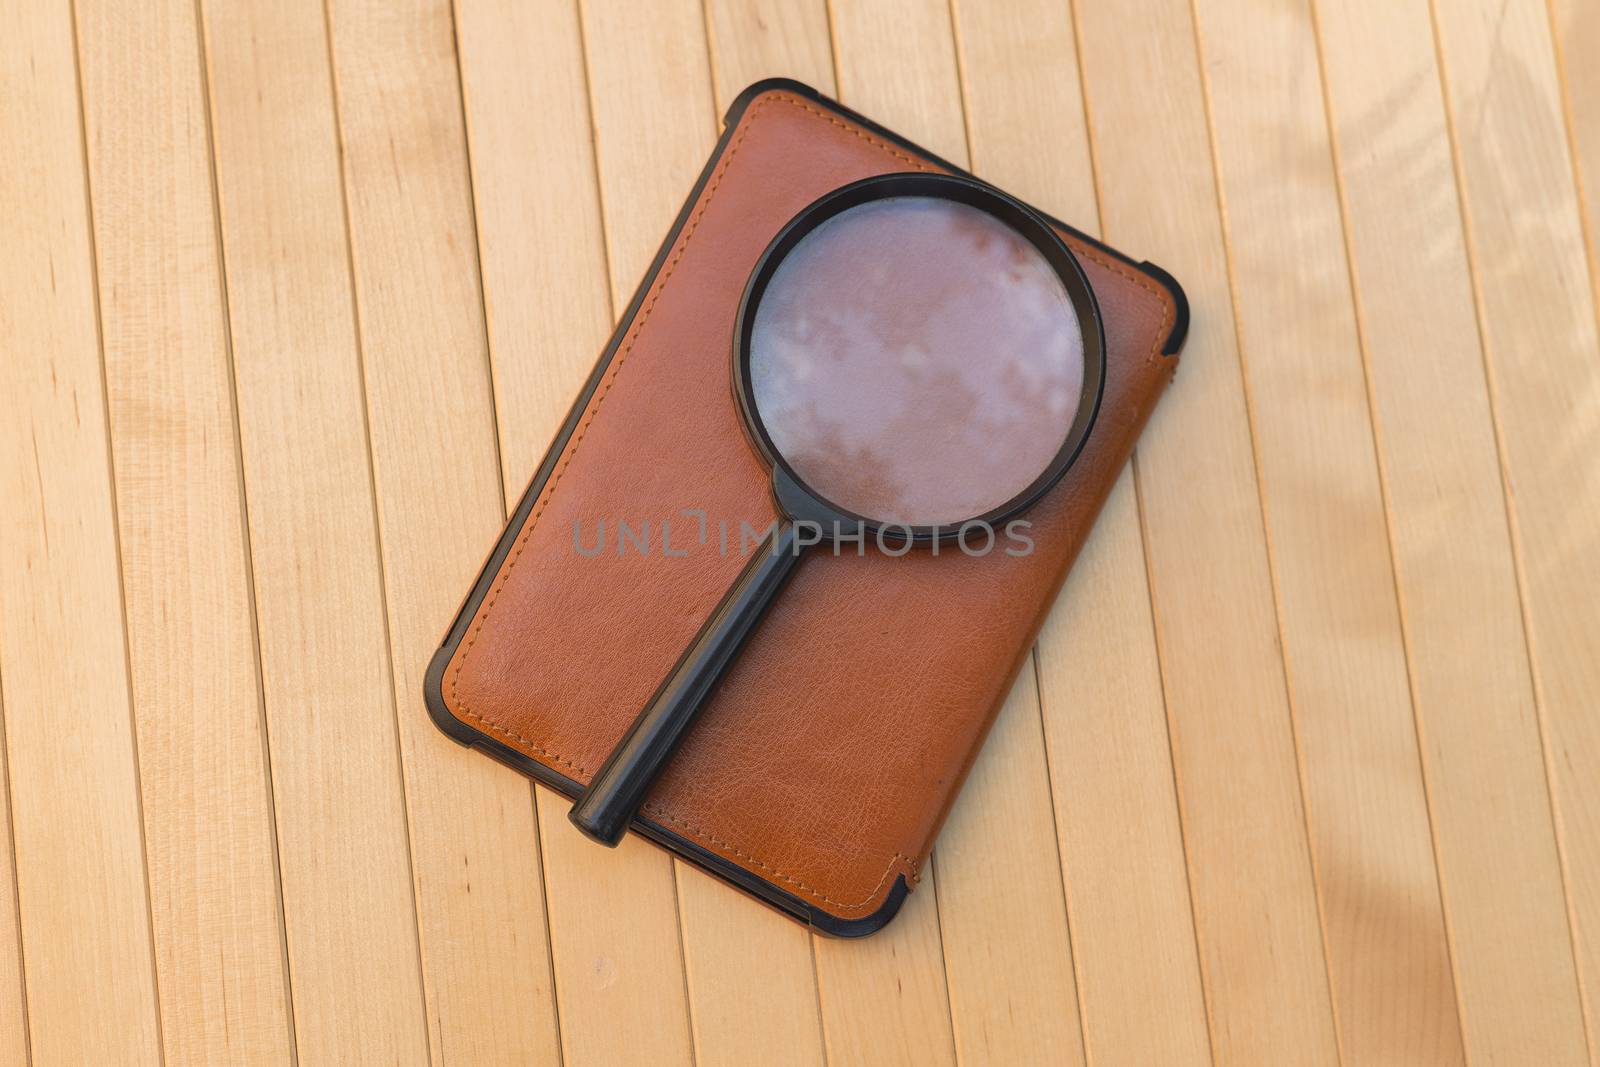 Magnifying glass on e-book on wooden background